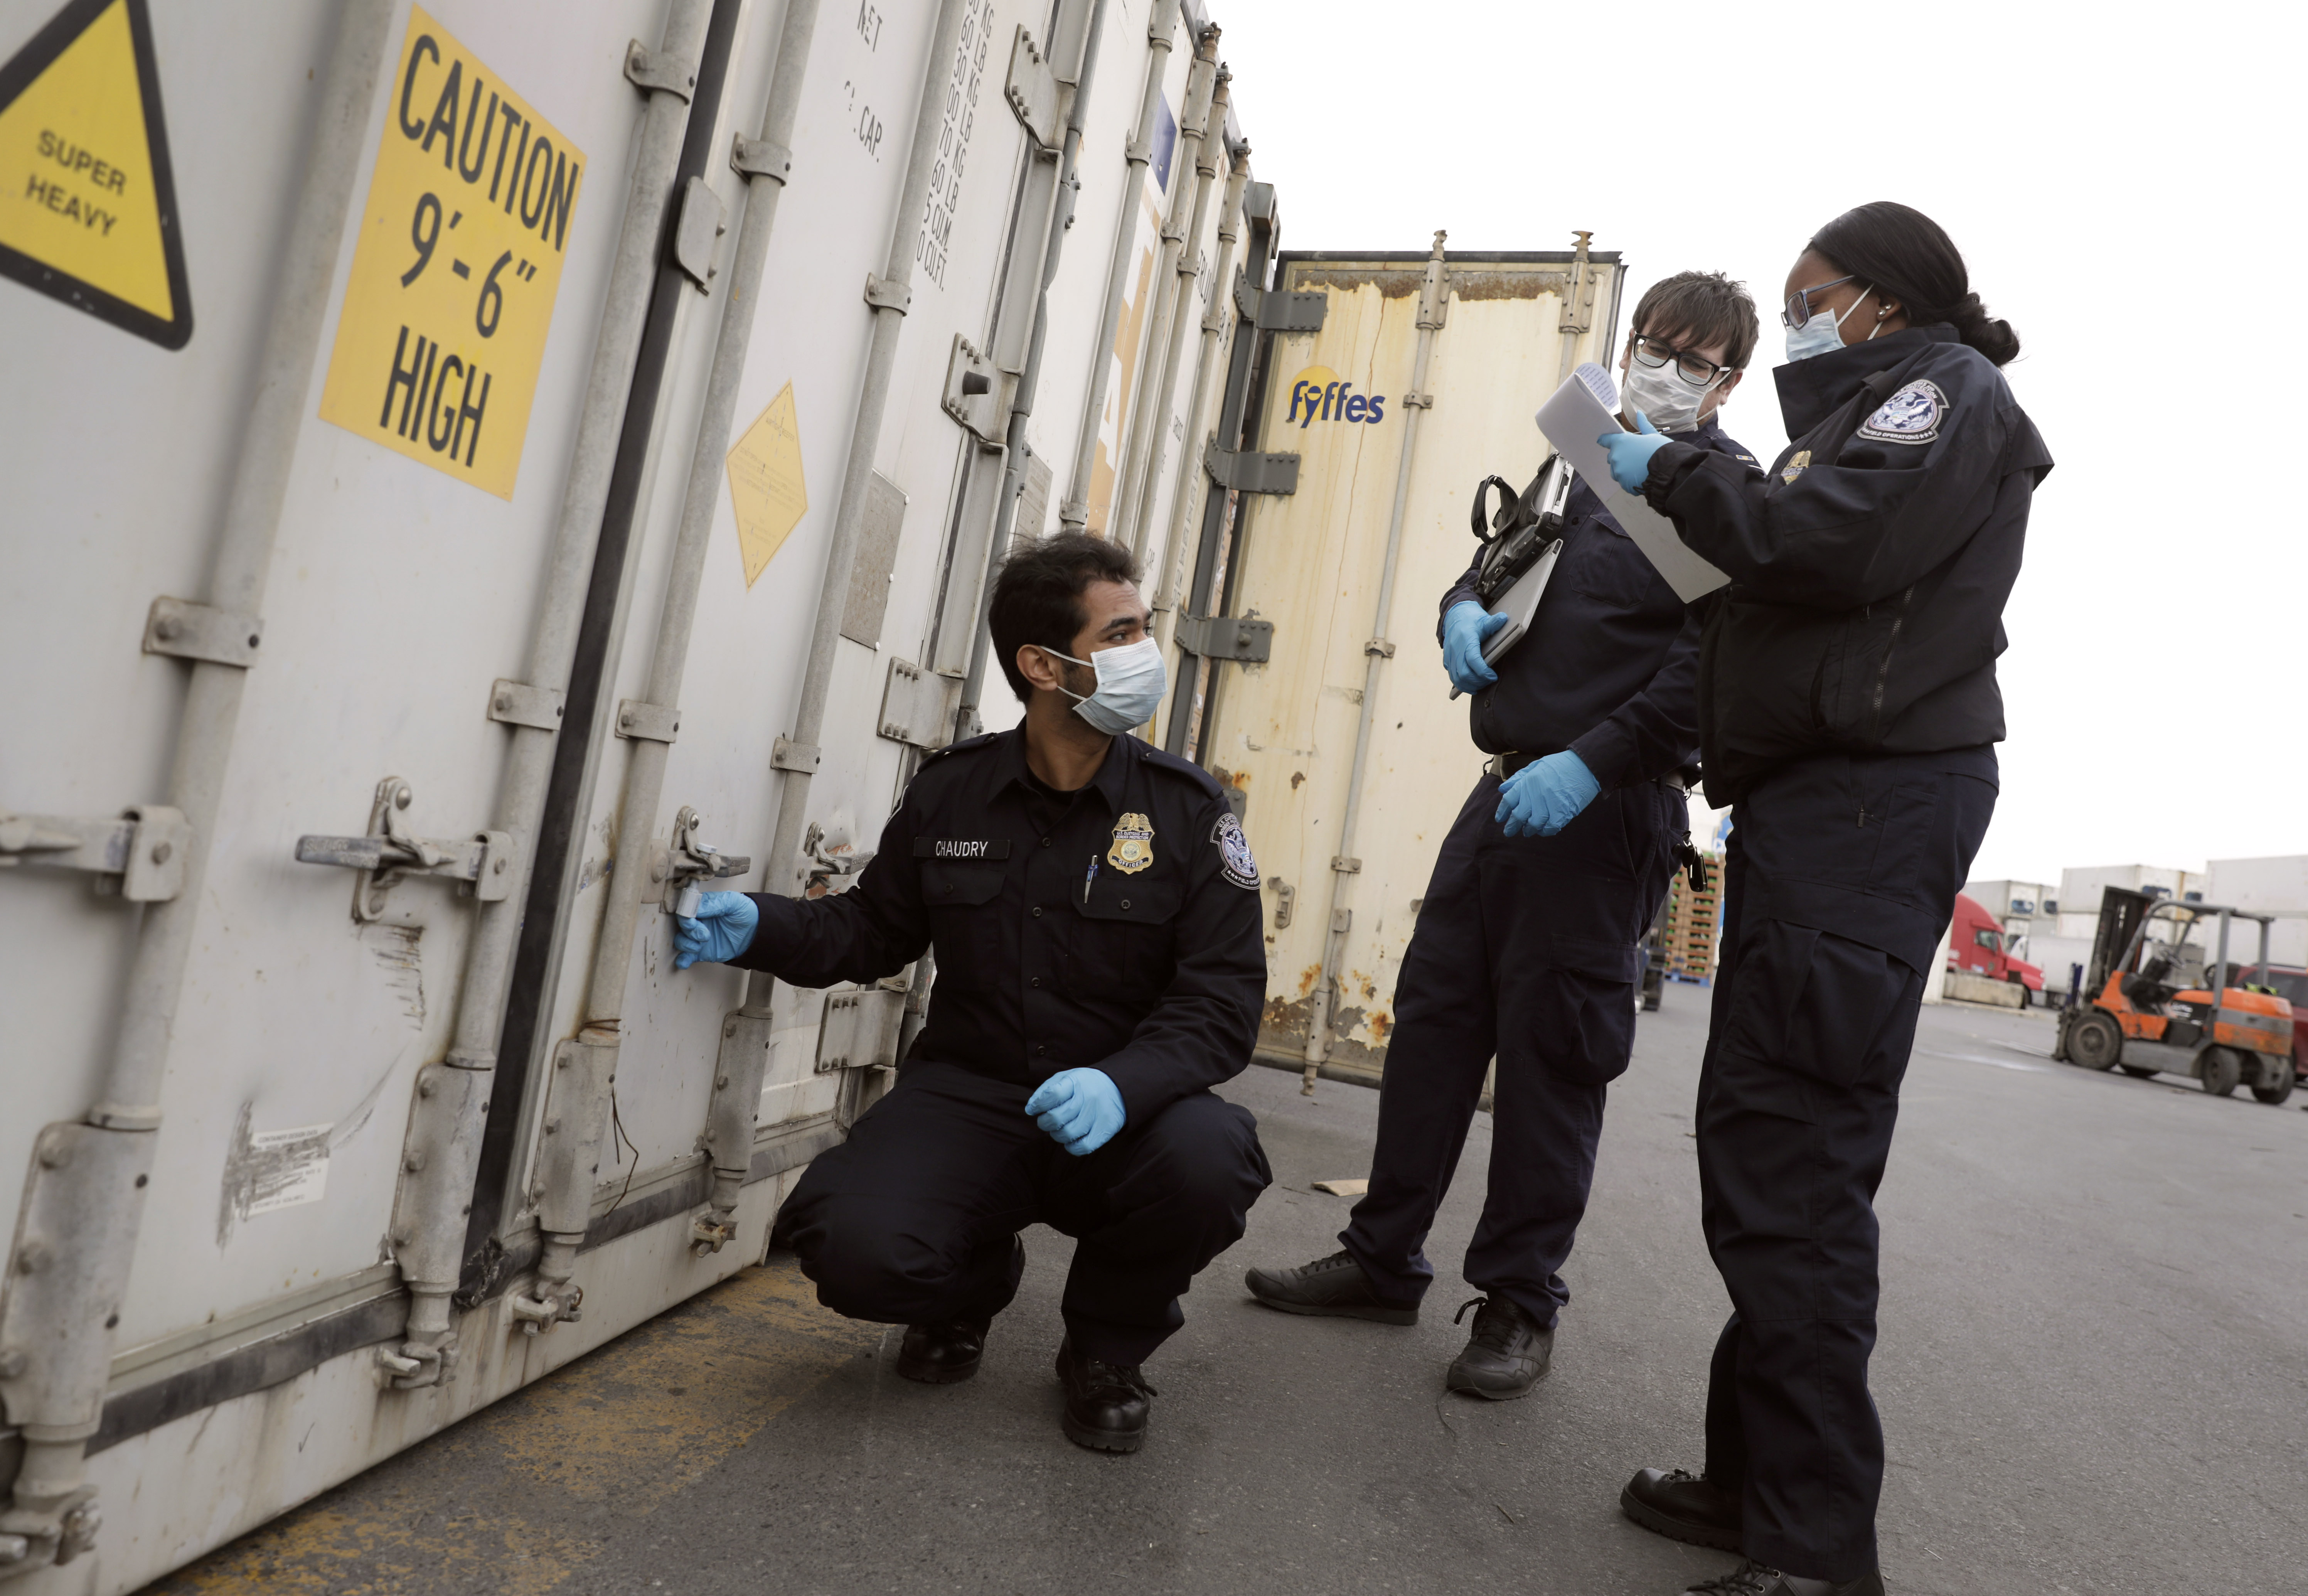 CBP agriculture specialists inspect a shipment